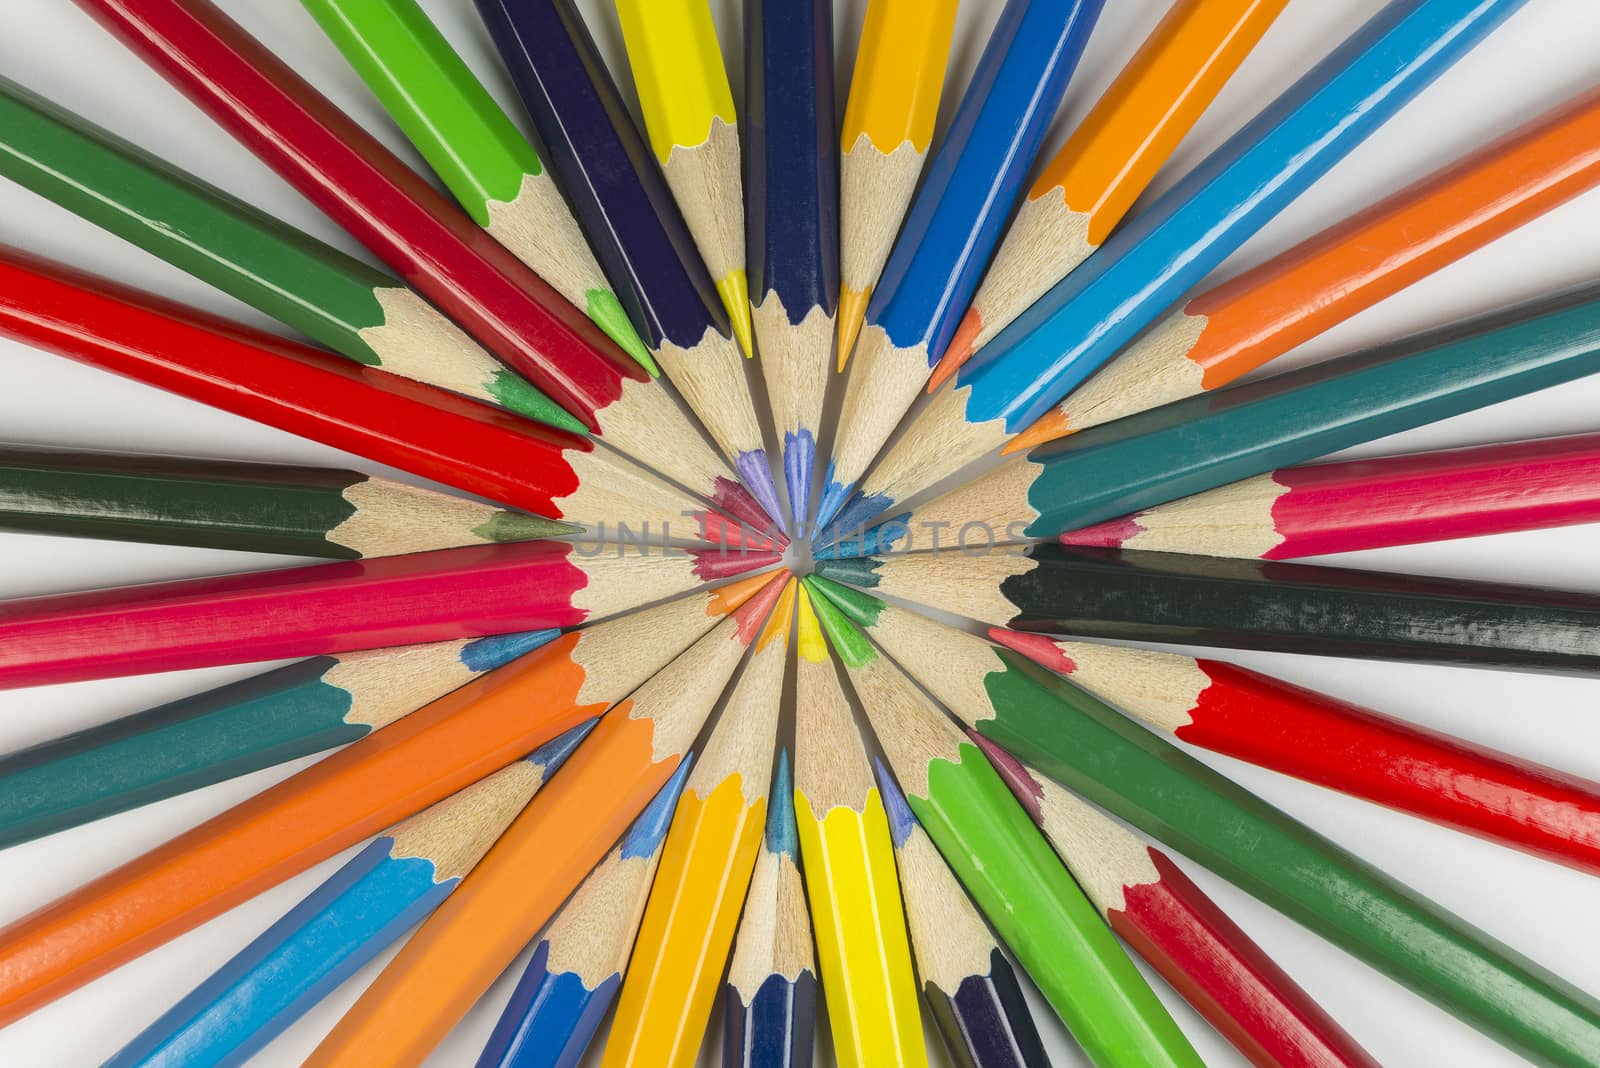 Abstract composition of complementary cirkel with color pencils against a white background
